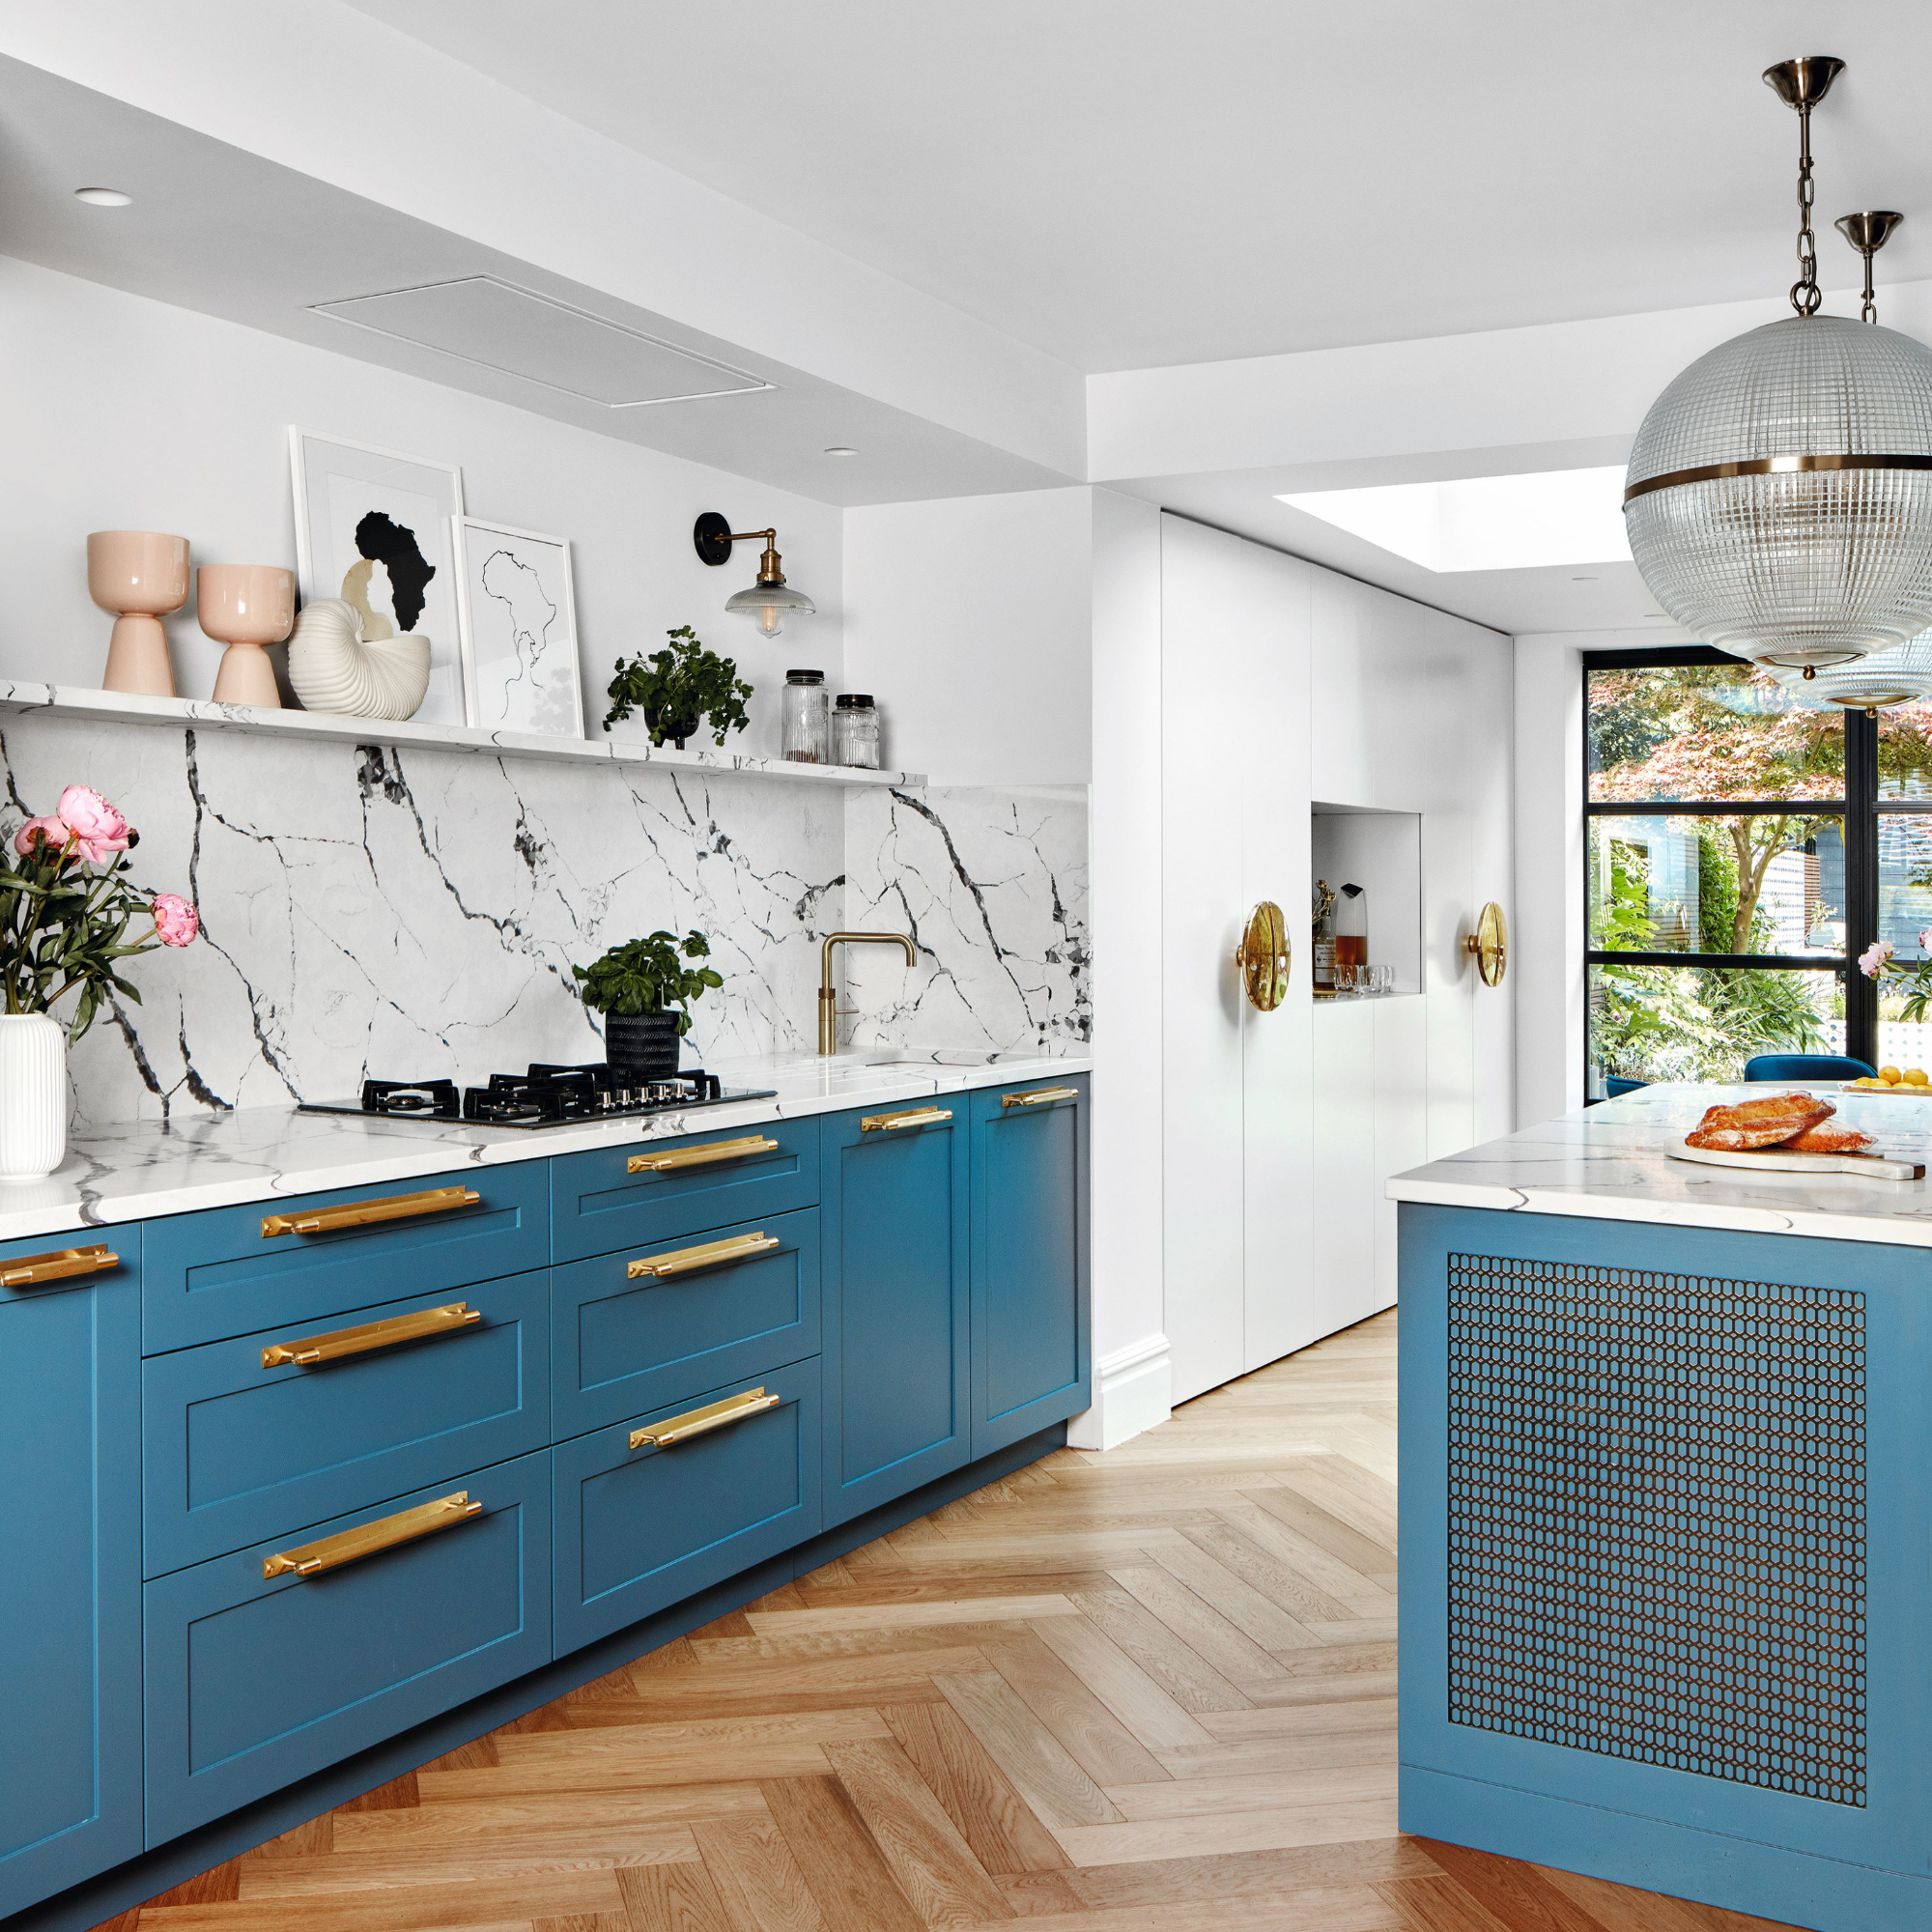 White painted kitchen with marble backsplash, blue painted cabinets and drawers with gold hardware and open shelving